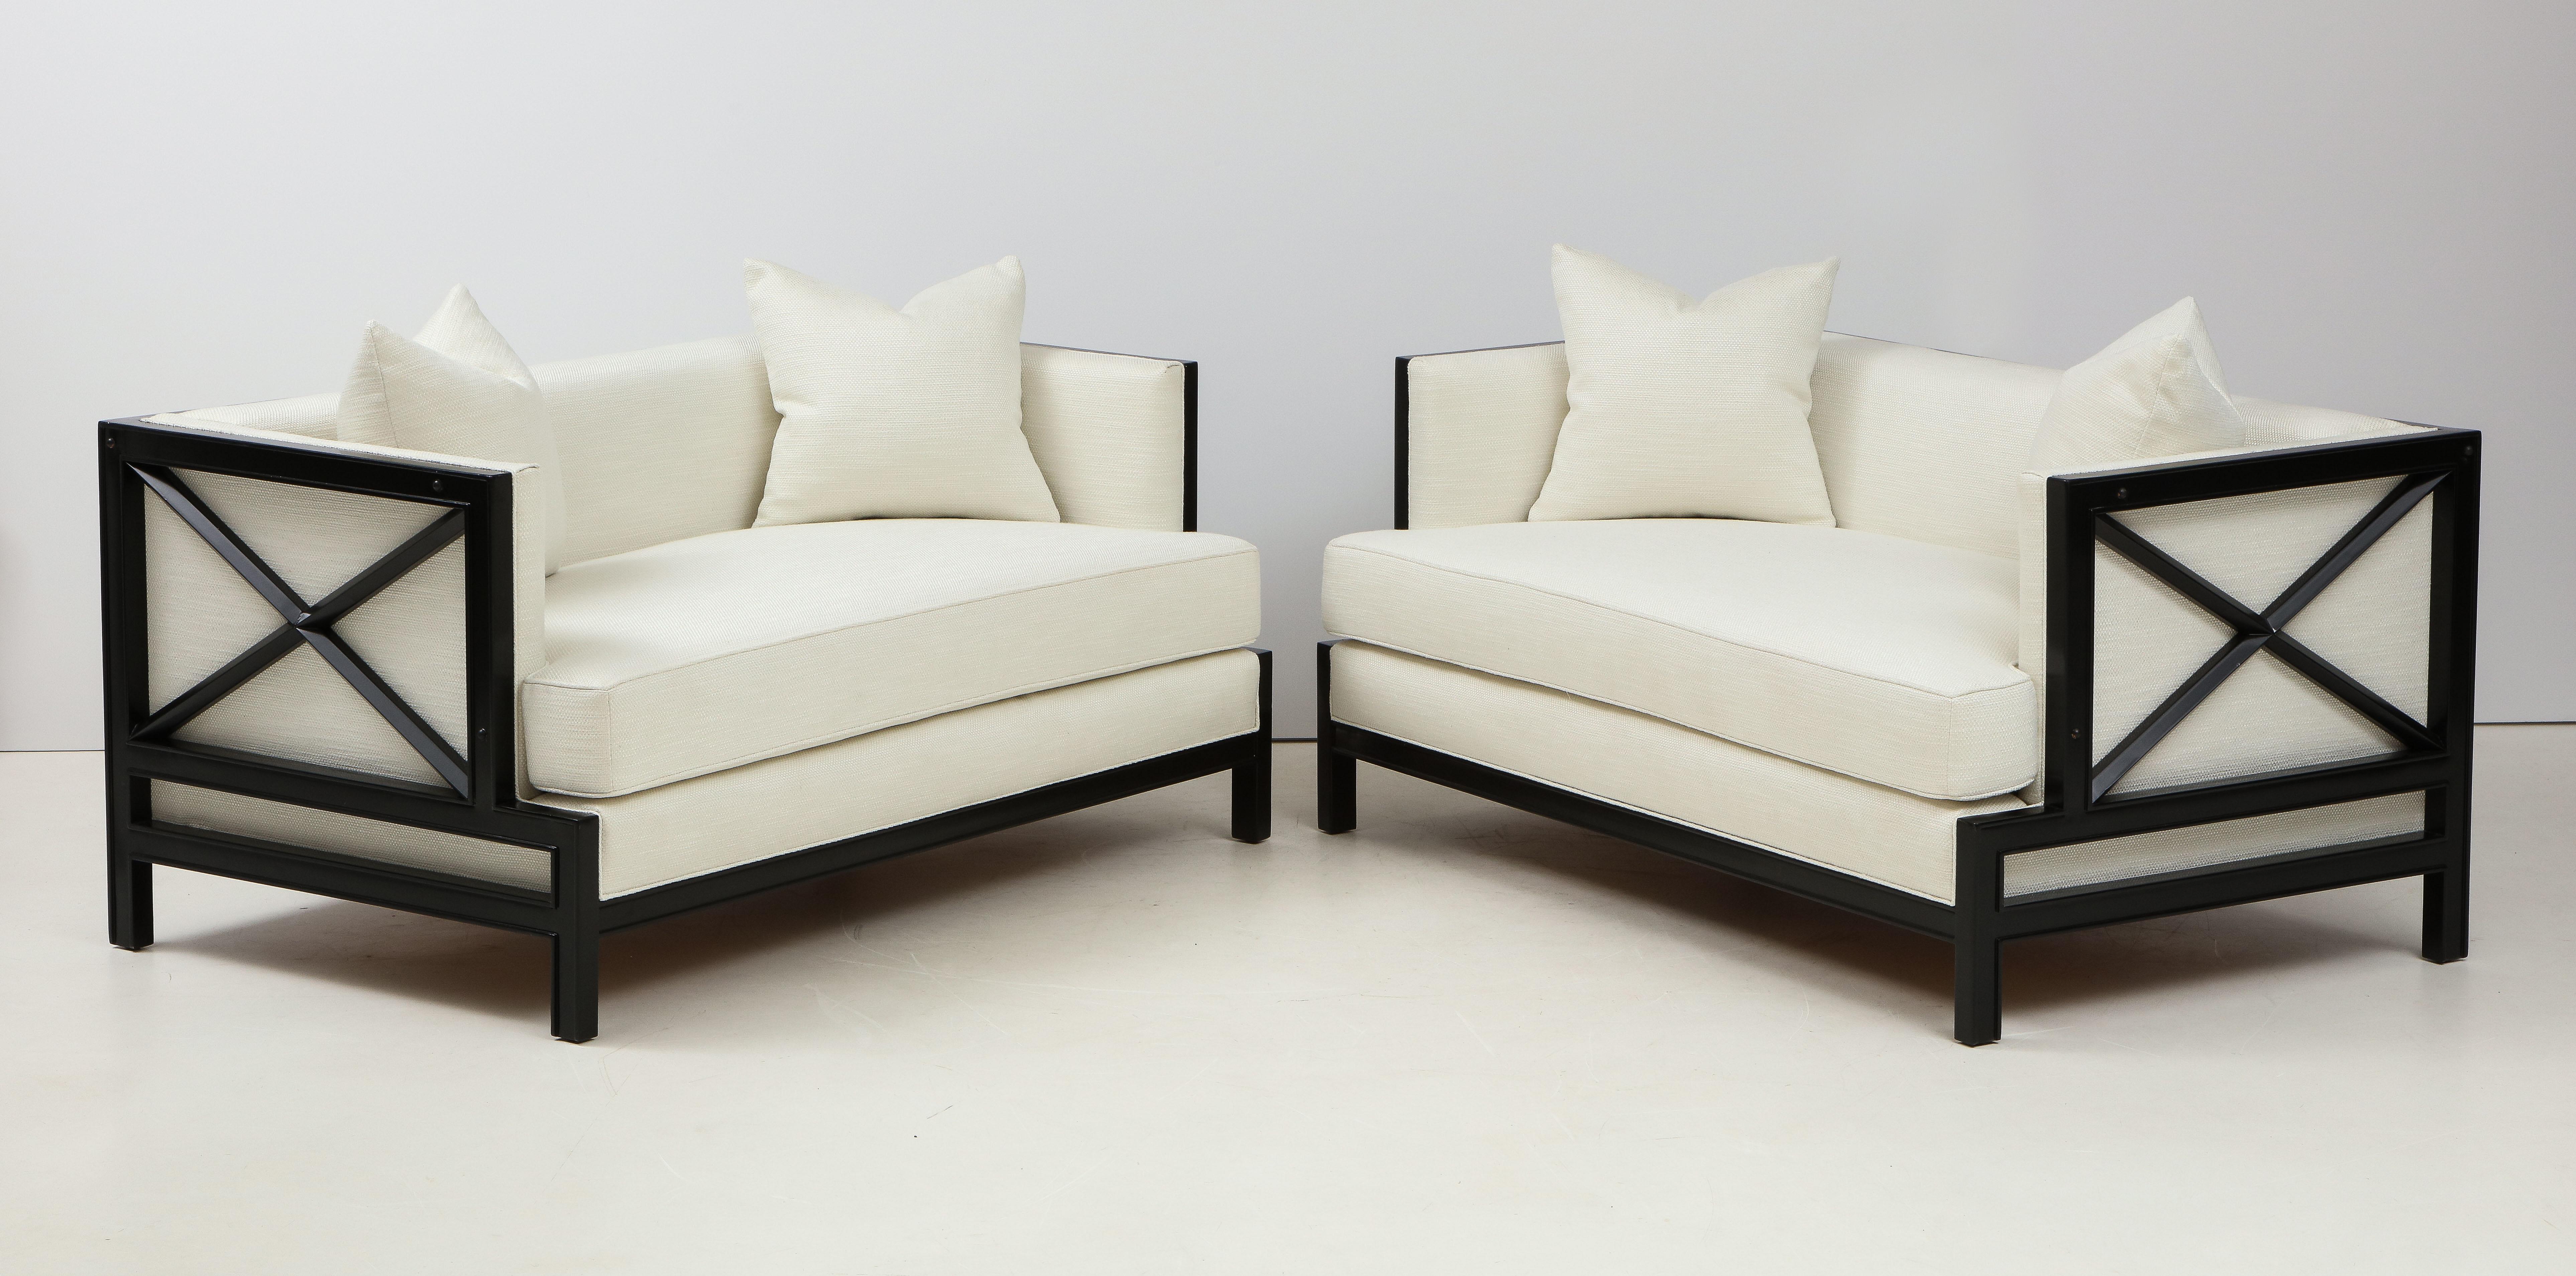 Beautiful James Mont Sofa's.
The elegant Lattice framed Sofa's have been Newly reupholstered in an ivory colored fabric and each sofa has two separate throw pillows.
The Sofa's are featured with a matching Ottoman which is Available for purchase